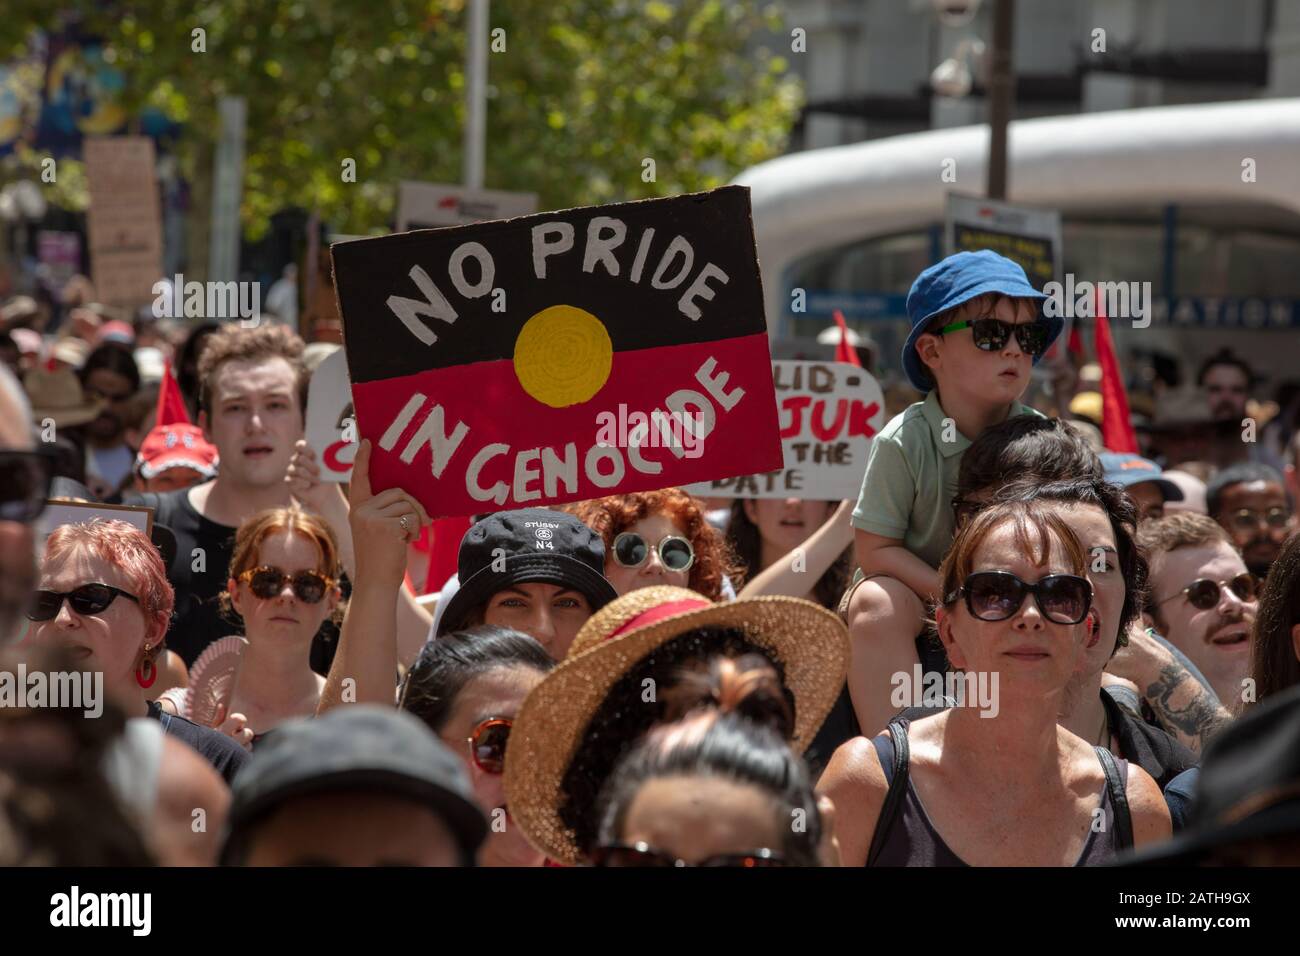 Perth, Australia. 26th January 2020. Invasion Day protests on stage and in the streets of central Perth, remembering the injustices done to the Aboriginals in the past and present. Protesters from all walks of life, demanding the national Australia Day and its celebrations to be scrapped and replaced by Invasion Day and to recognize Aboriginal rights. Credit: Joe Kuis / Alamy News Stock Photo